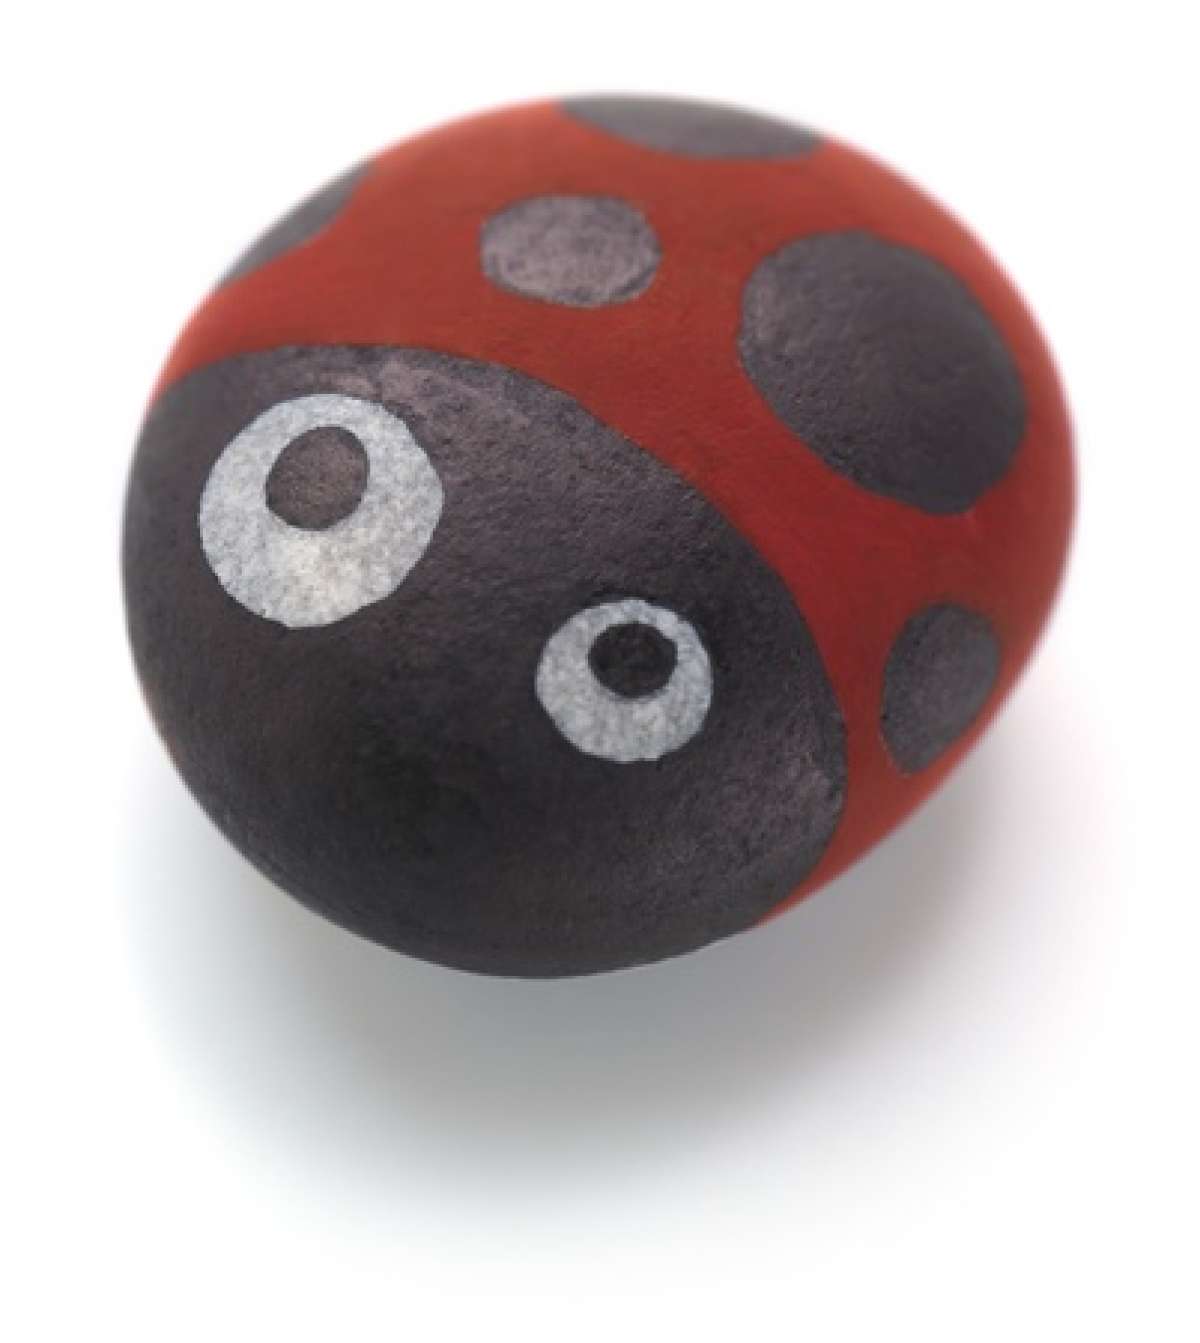 Stone Paperweight Activity for Kids